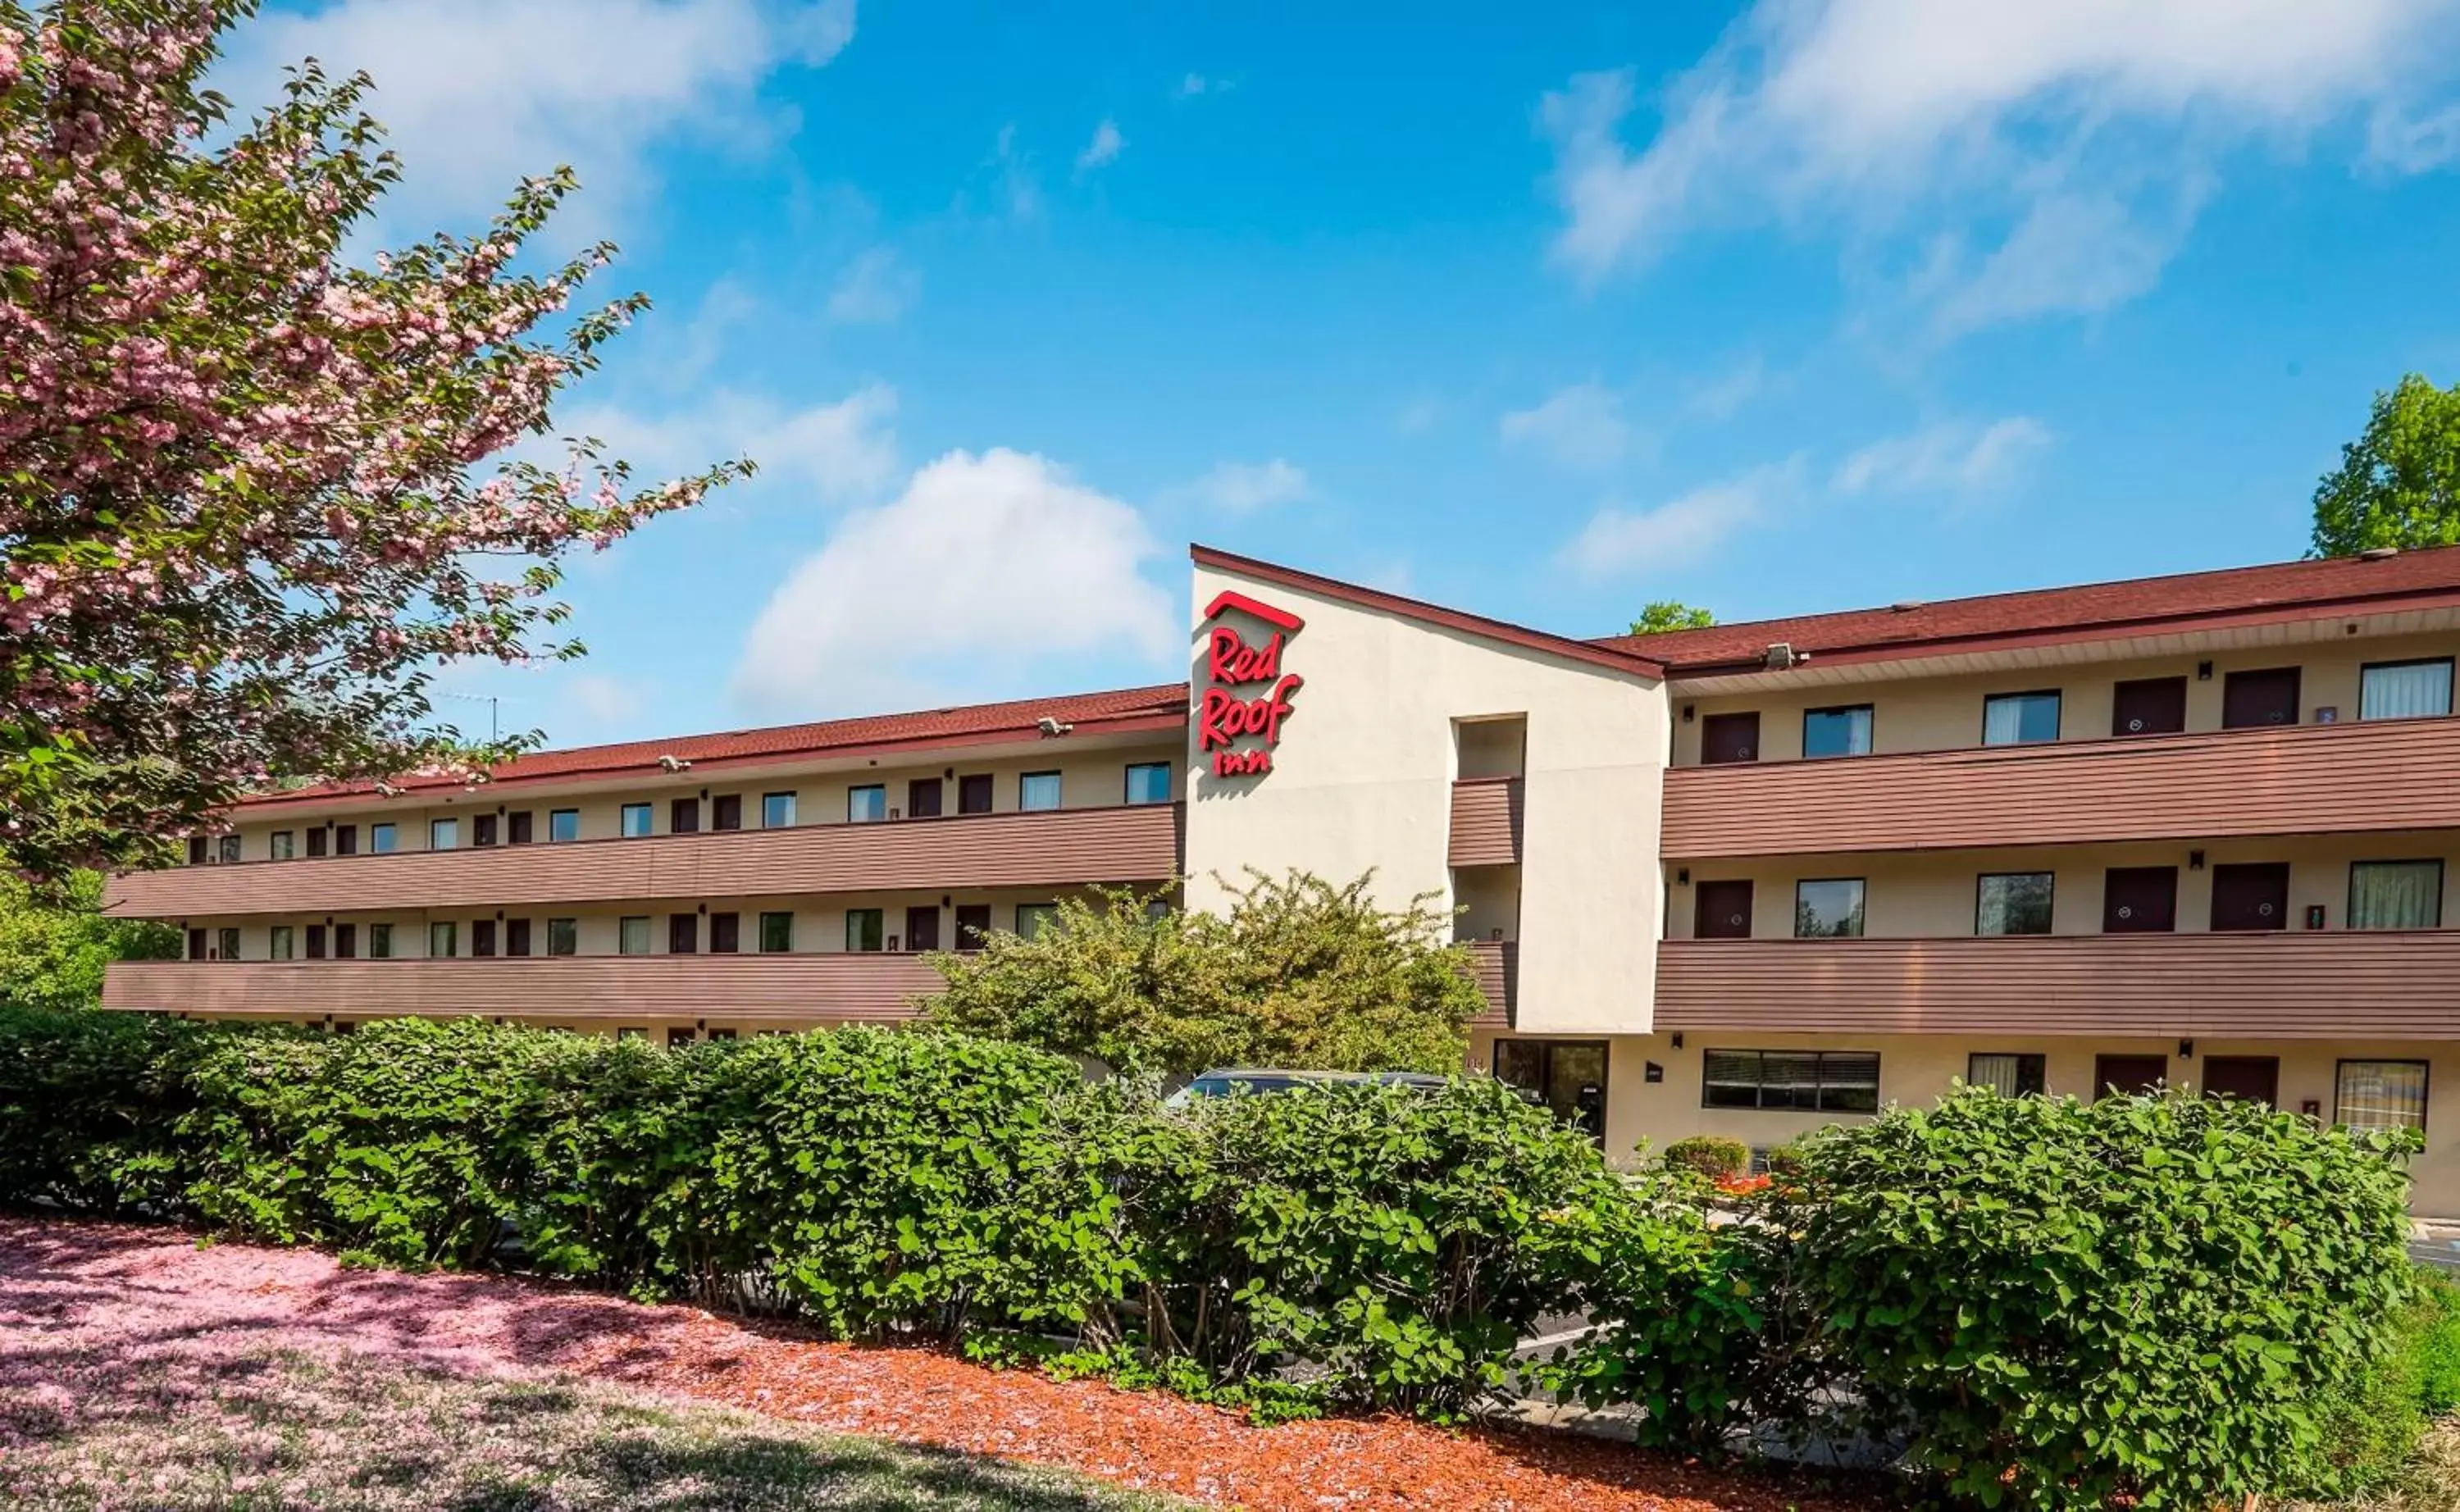 Property Building in Red Roof Inn Tinton Falls-Jersey Shore